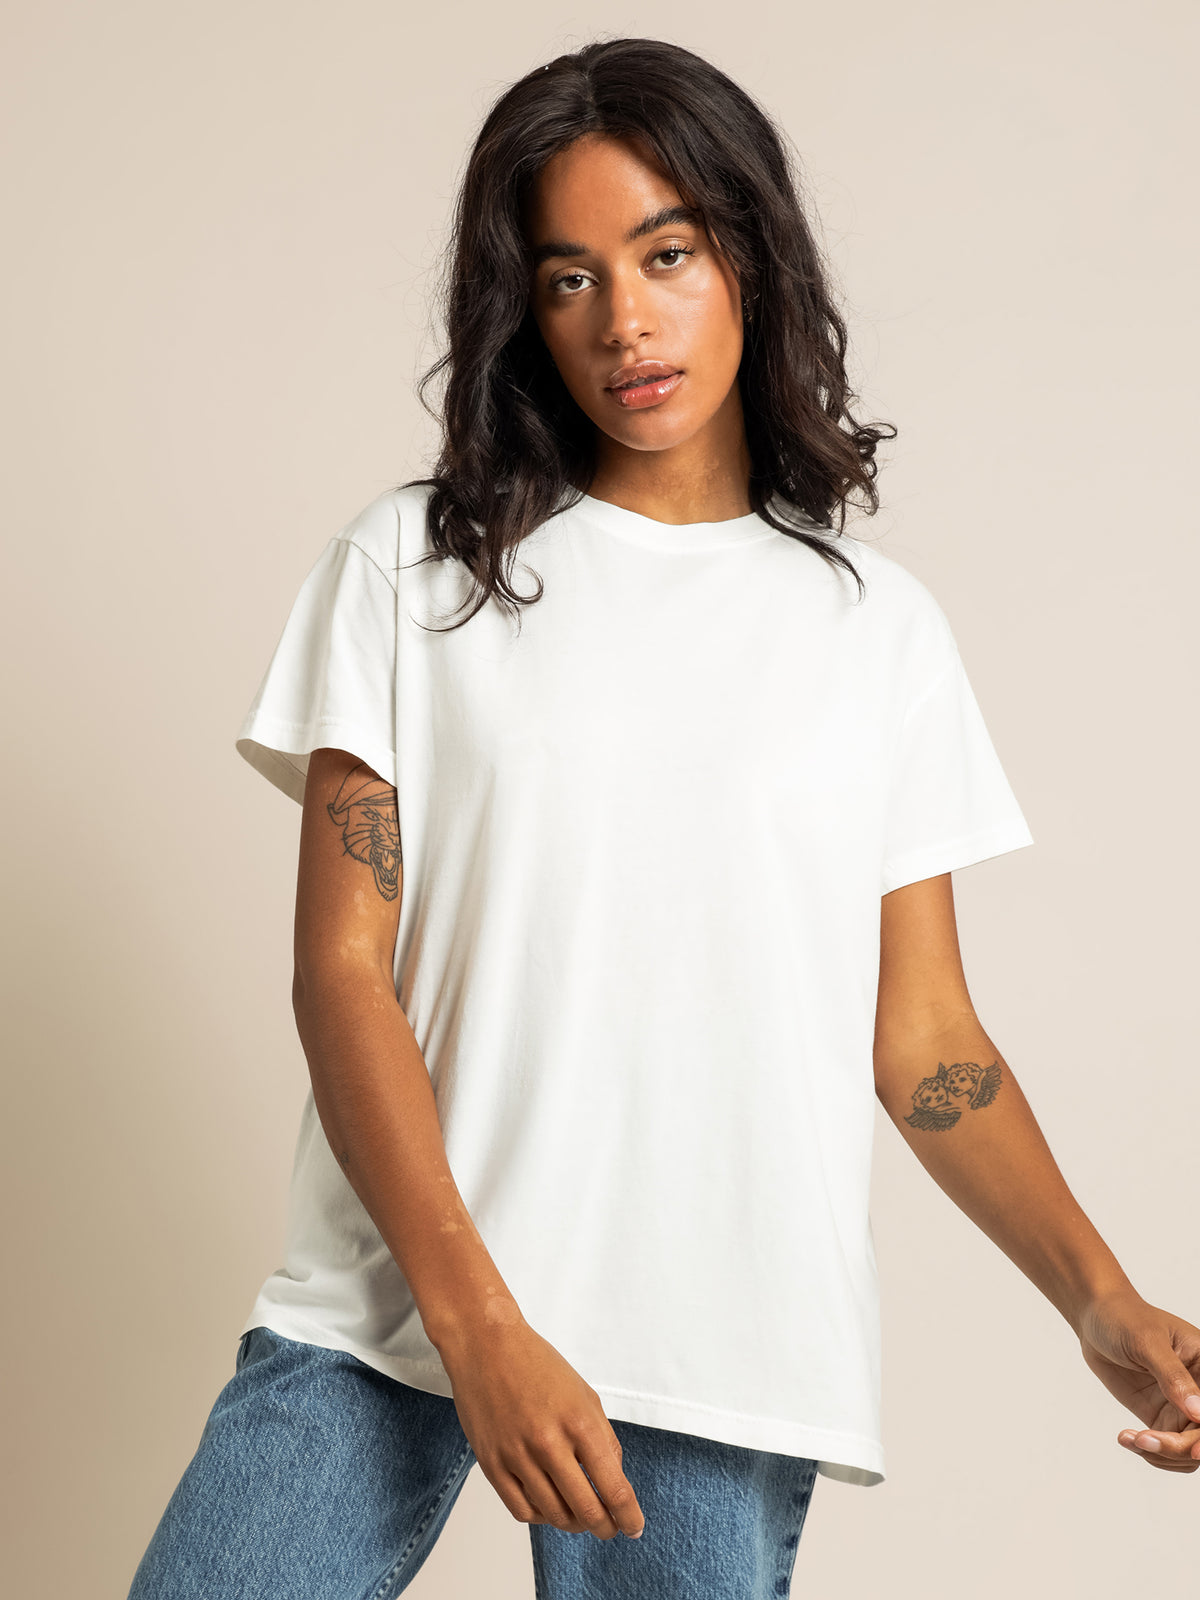 Tina T-Shirt in Off White